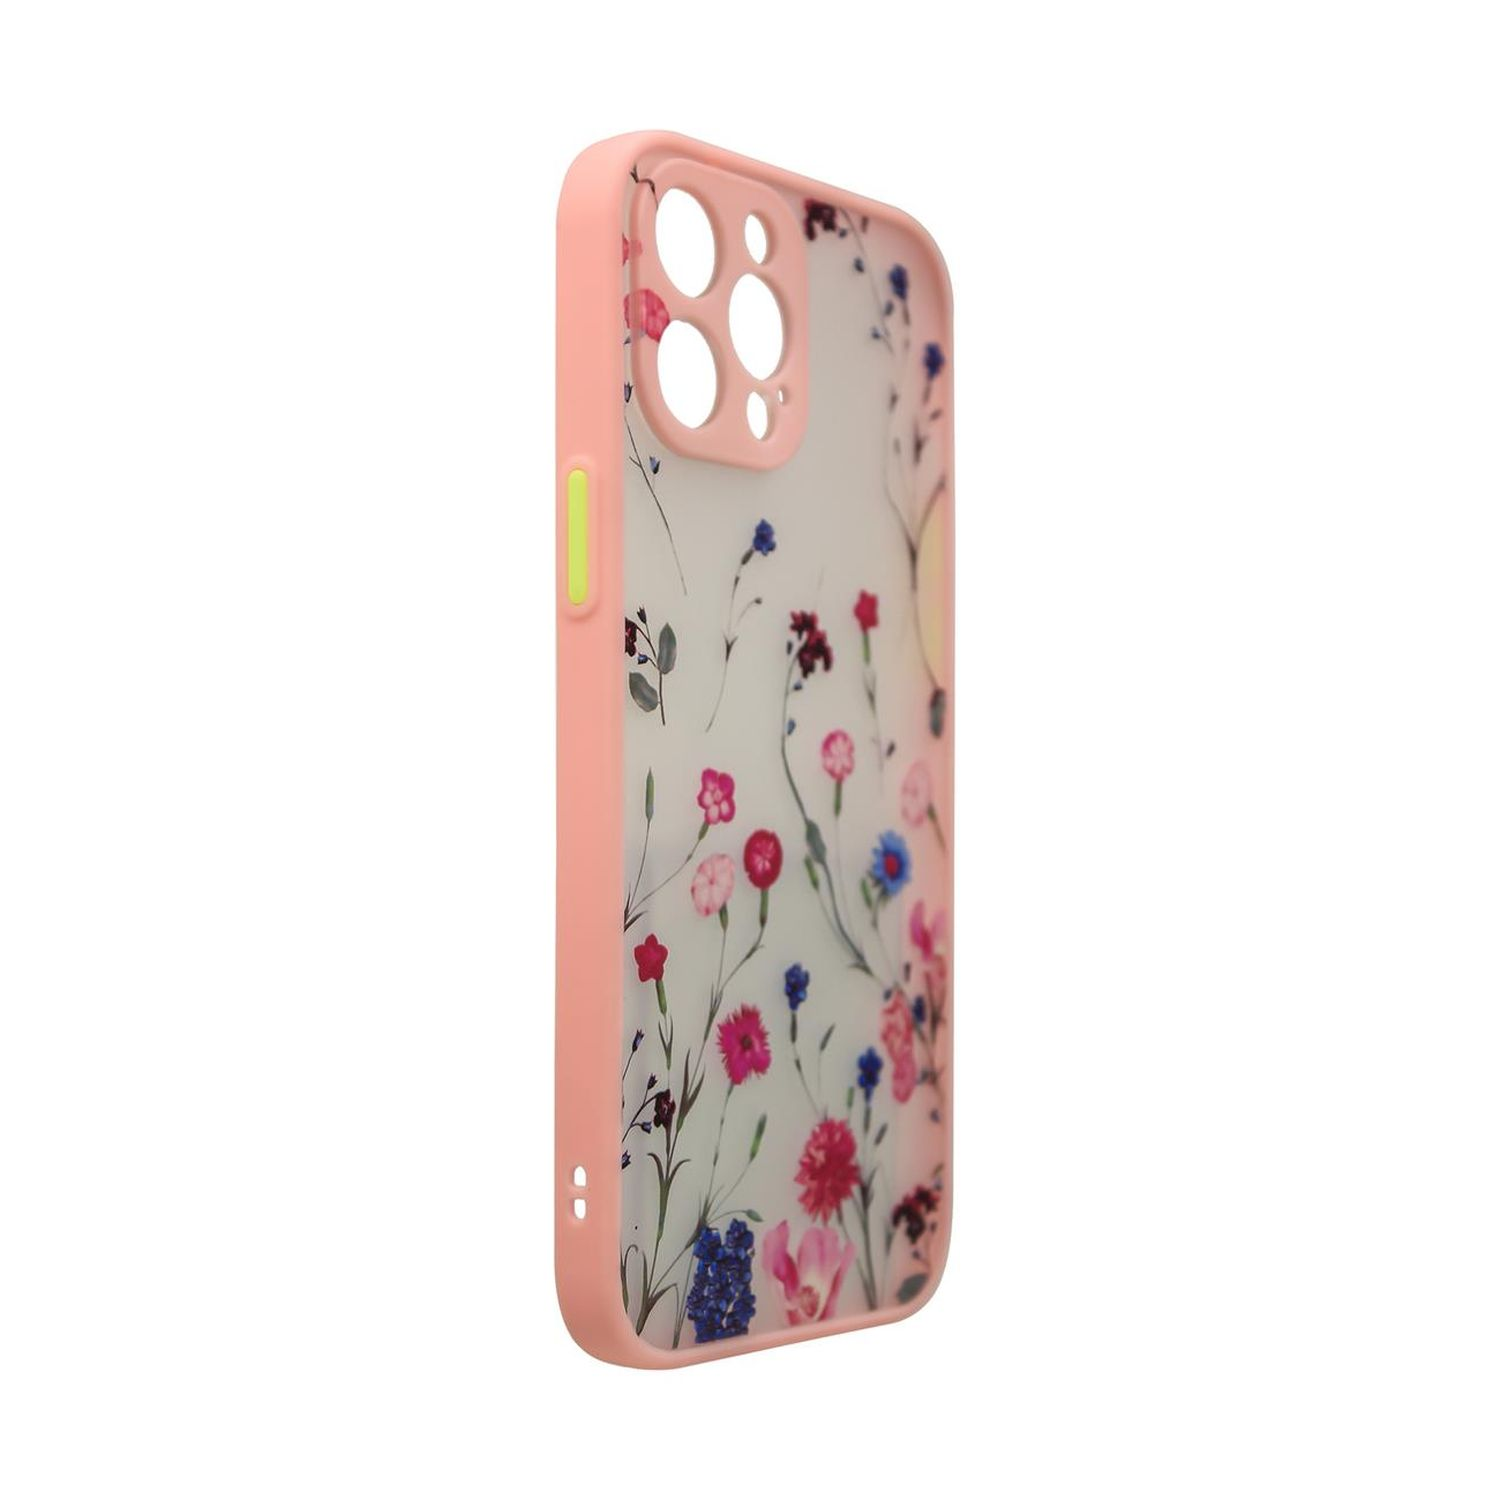 mit 13, Apple, Pink, Pink Backcover, 13 Handy-Hülle Design COFI Cover \